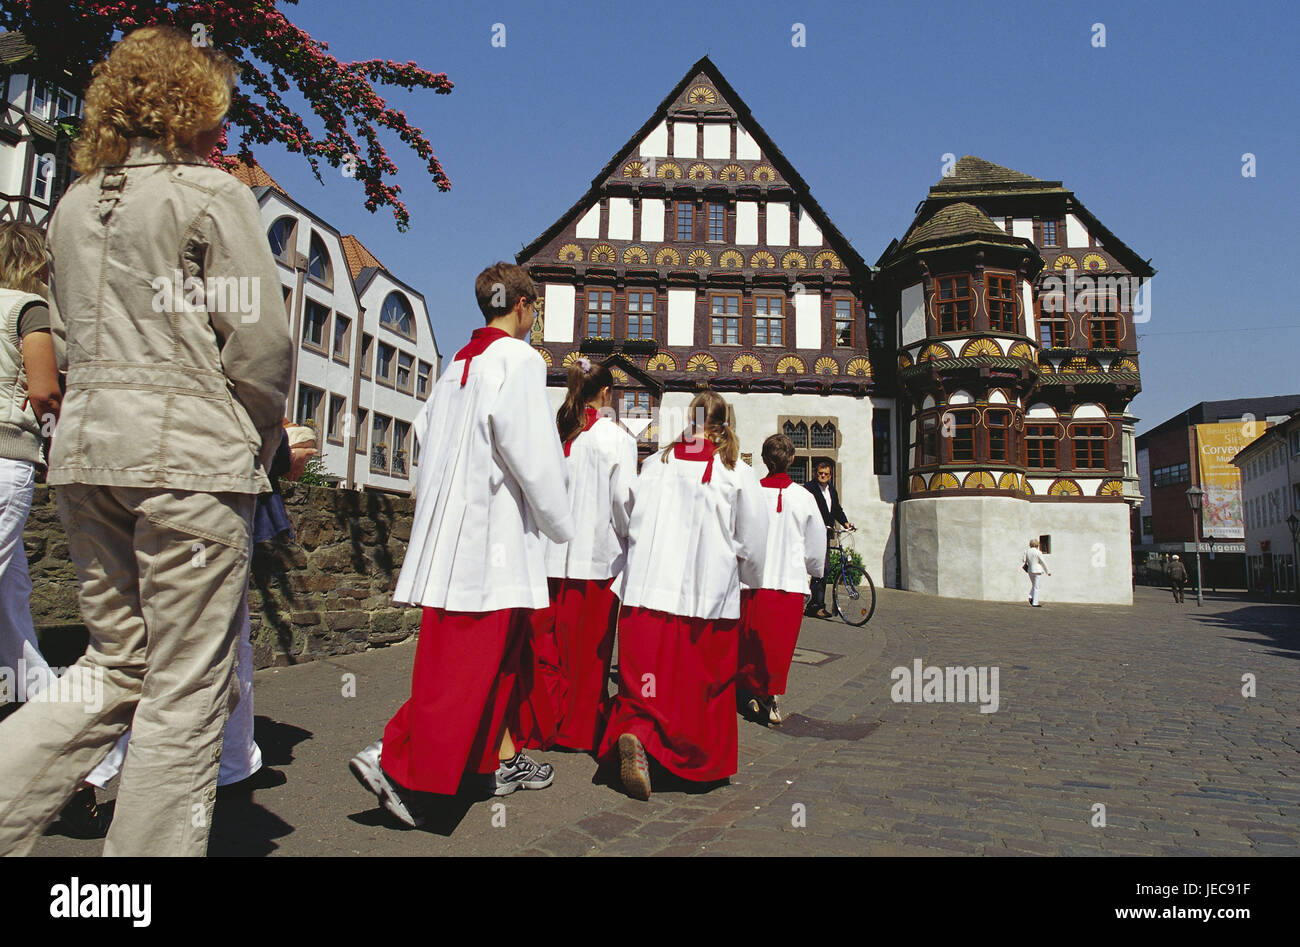 Germany, North Rhine-Westphalia, Höxter, Old Town, Ministranten, procession, Dechanei, Teutoburger wood, Weser mountainous country, marketplace, houses, buildings, historically, architecture, in 1561, local view, half-timbered, half-timbered house, carving, ornaments, professional rosettes, Palmetten, wooden relief, Adel's court, person, believers, passers-by, faith, outside, Stock Photo